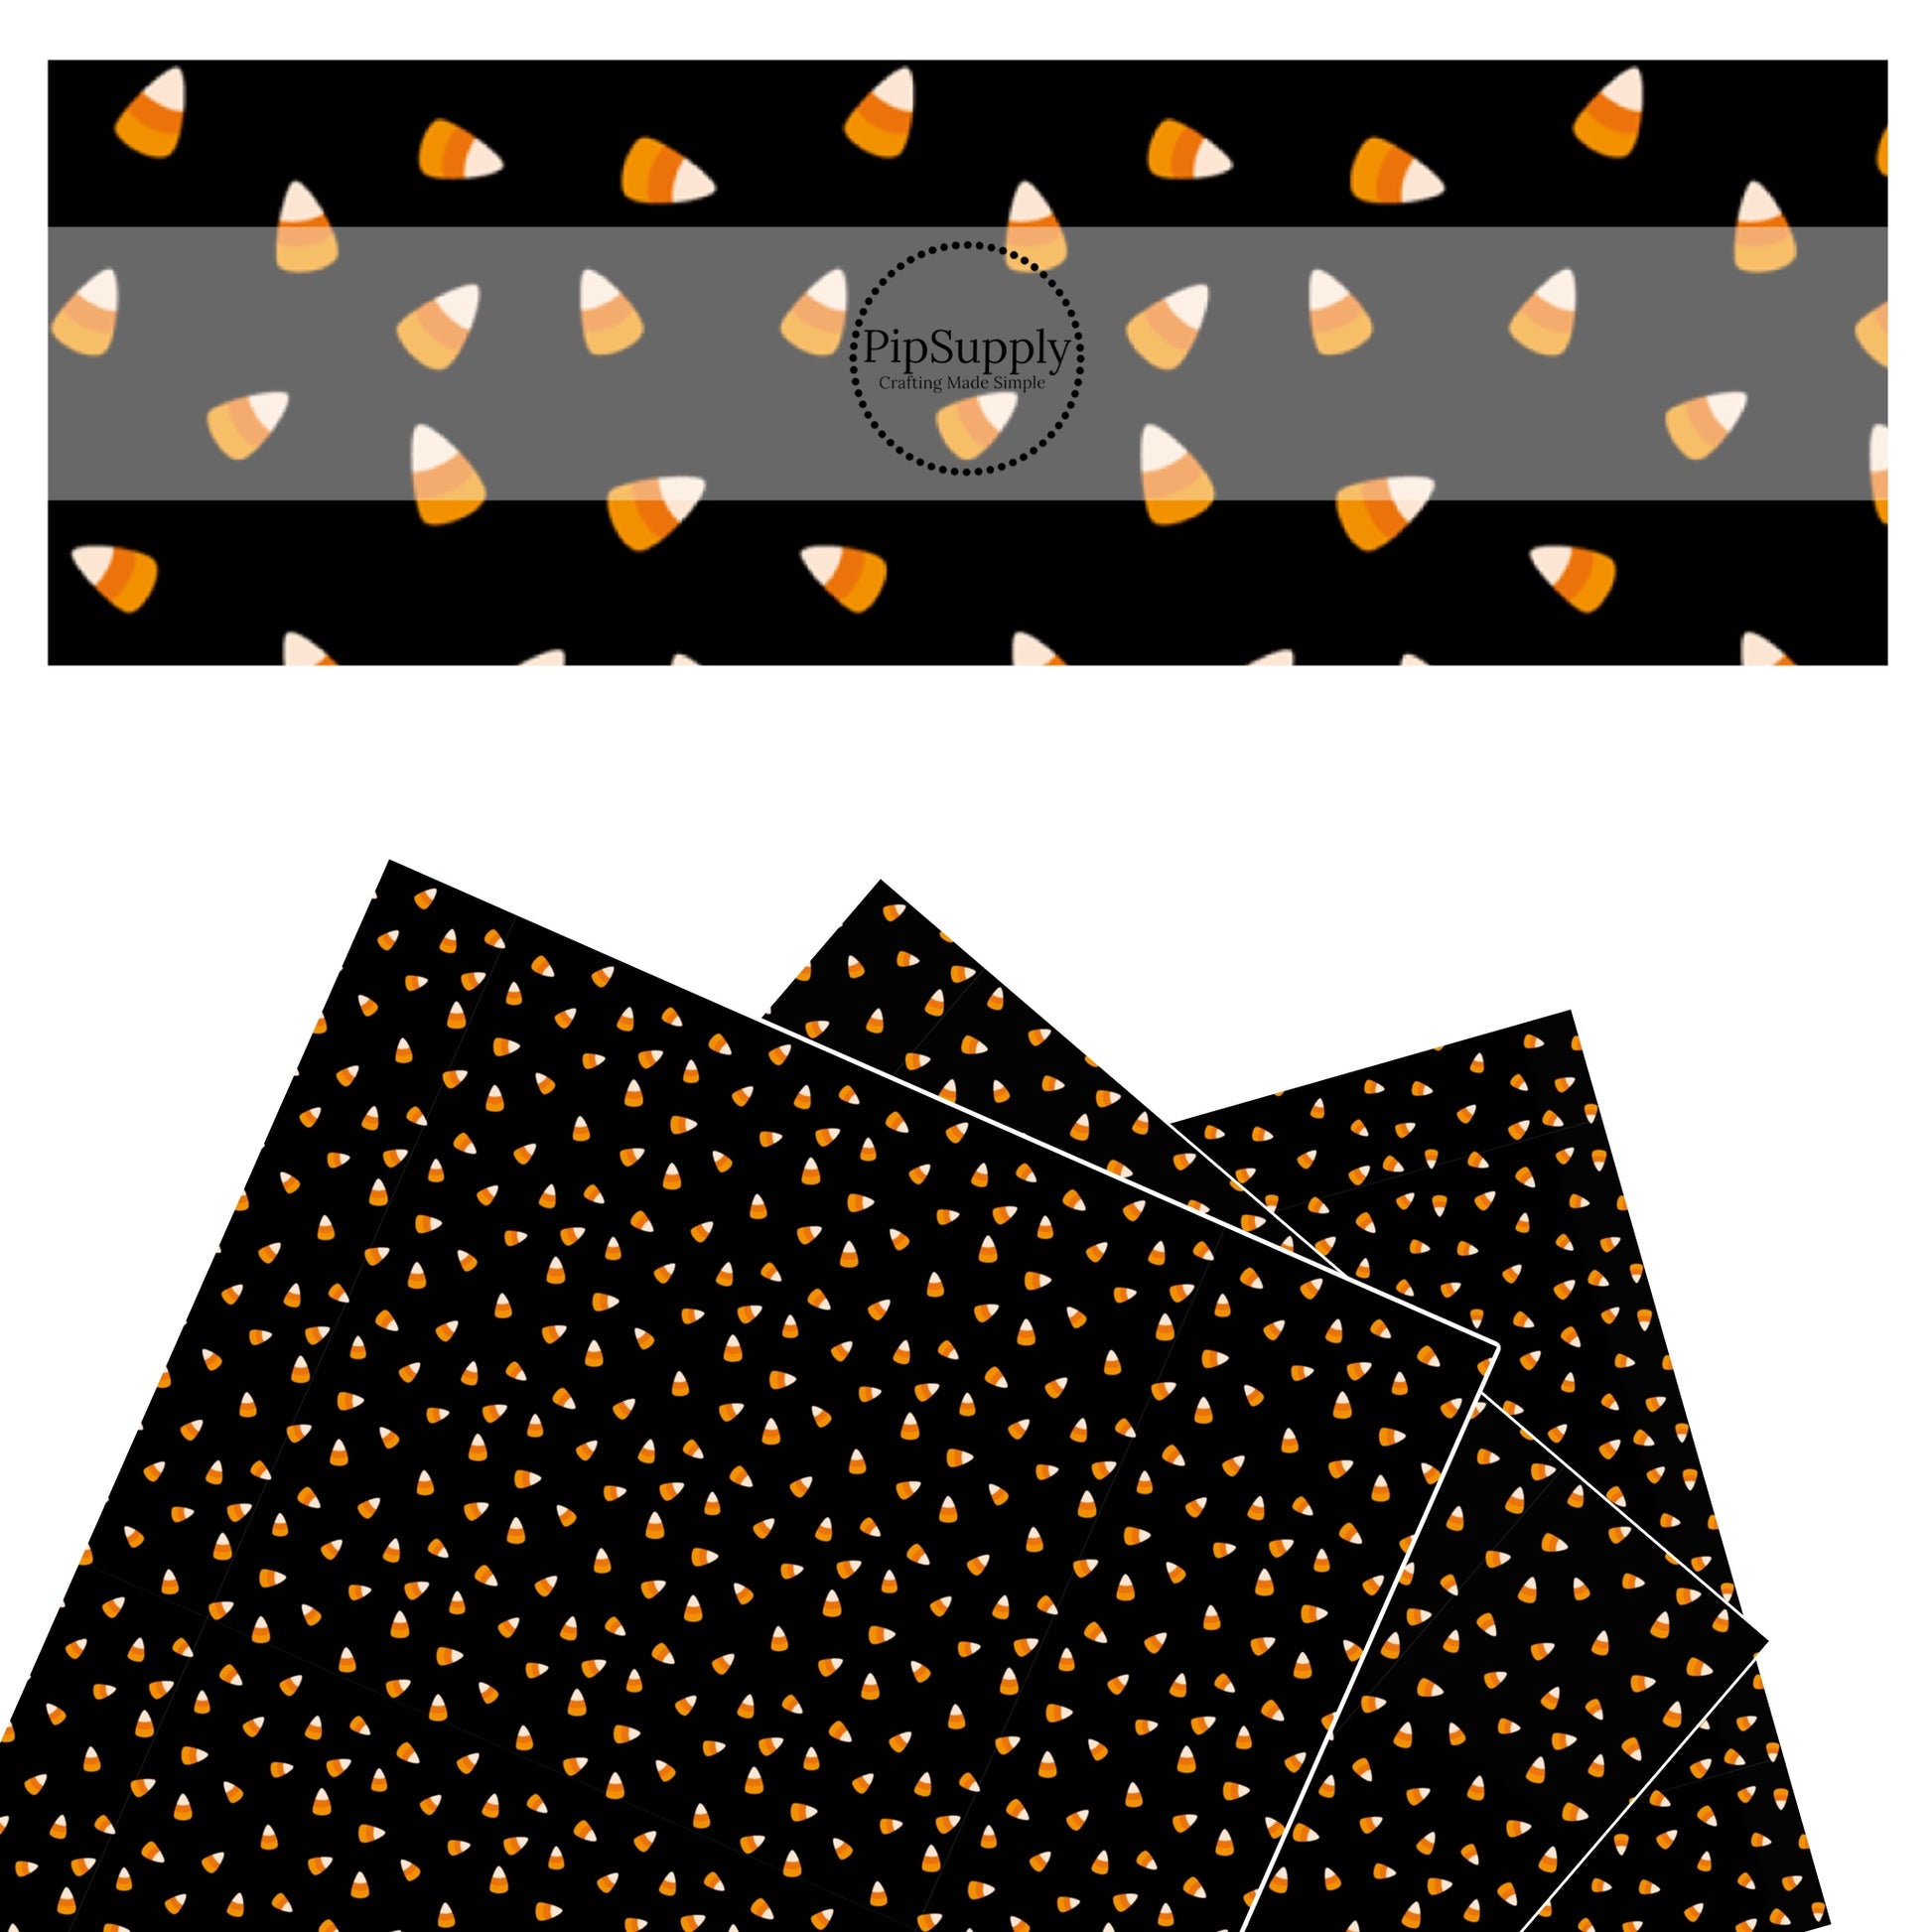 Orange candy corns scattered on black faux leather sheets